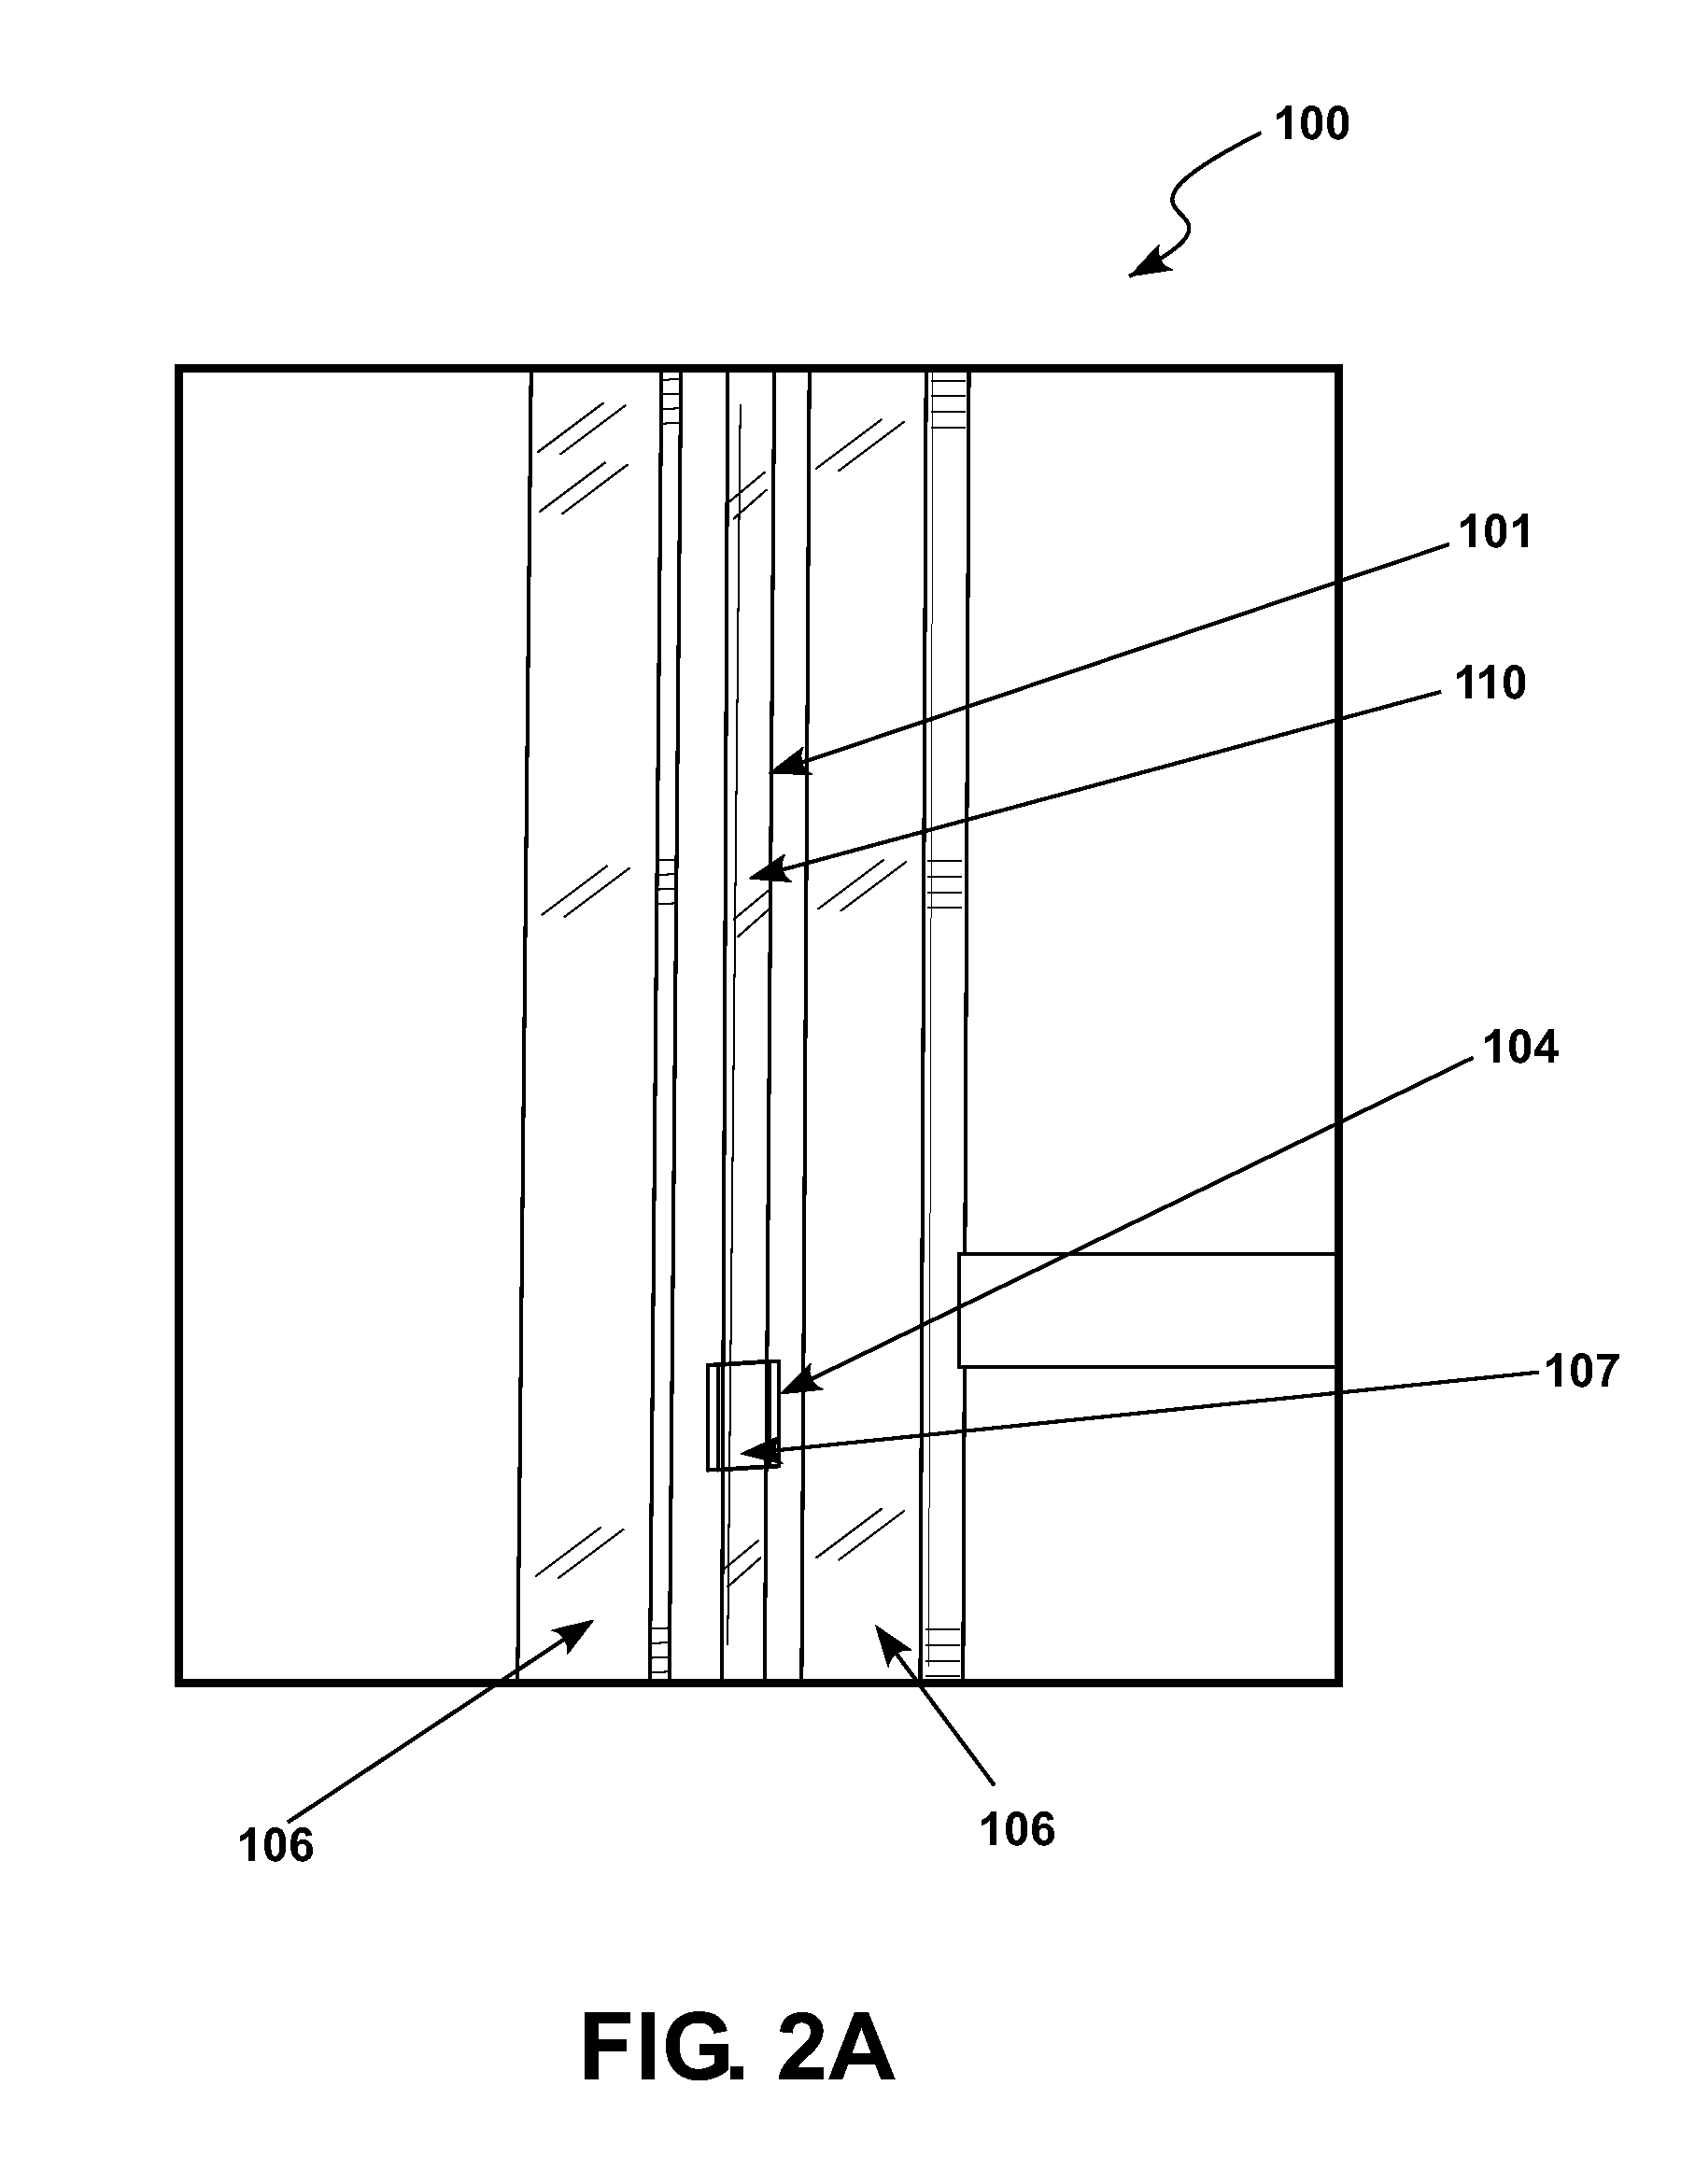 Microfluidic separation device and method of making same